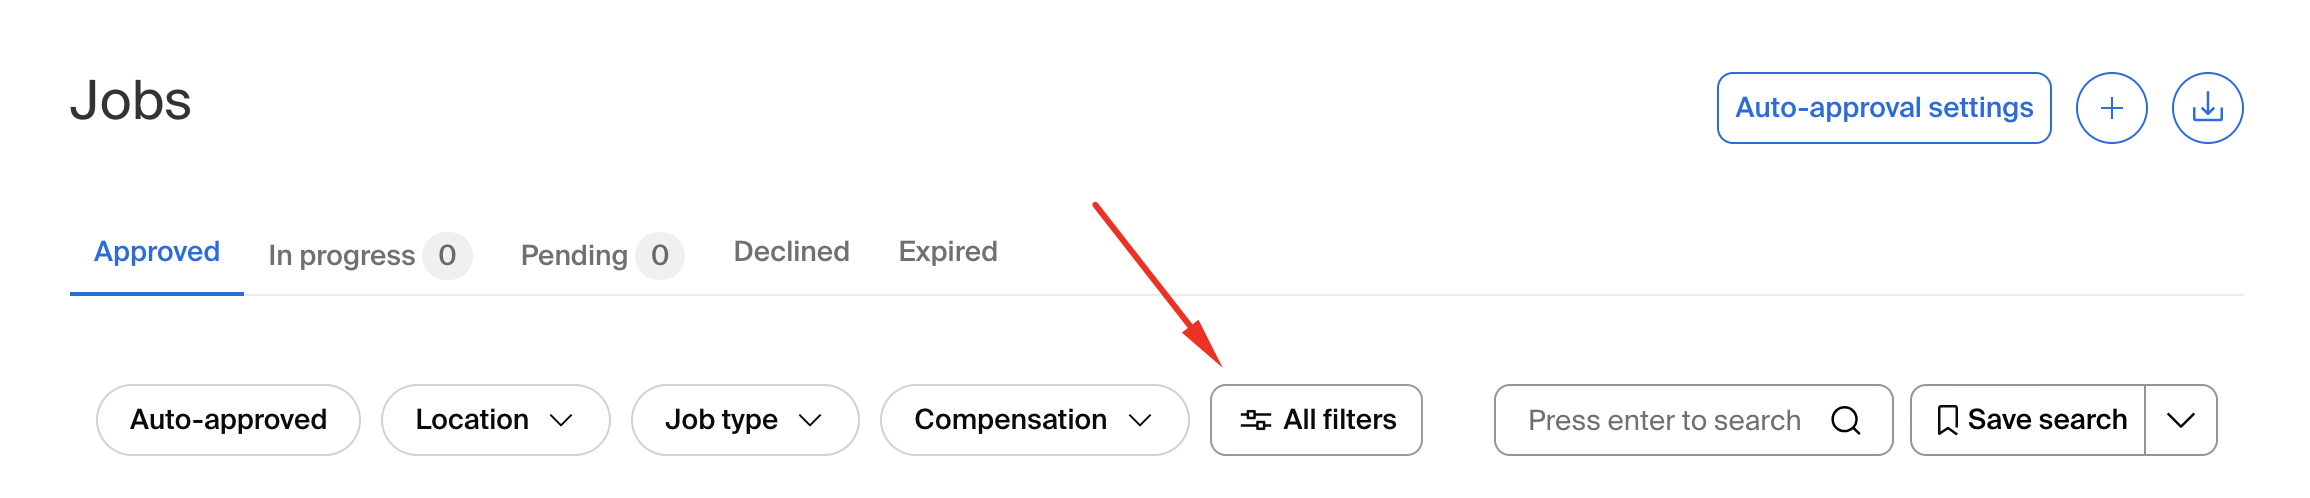 All filters button on job listings page.png